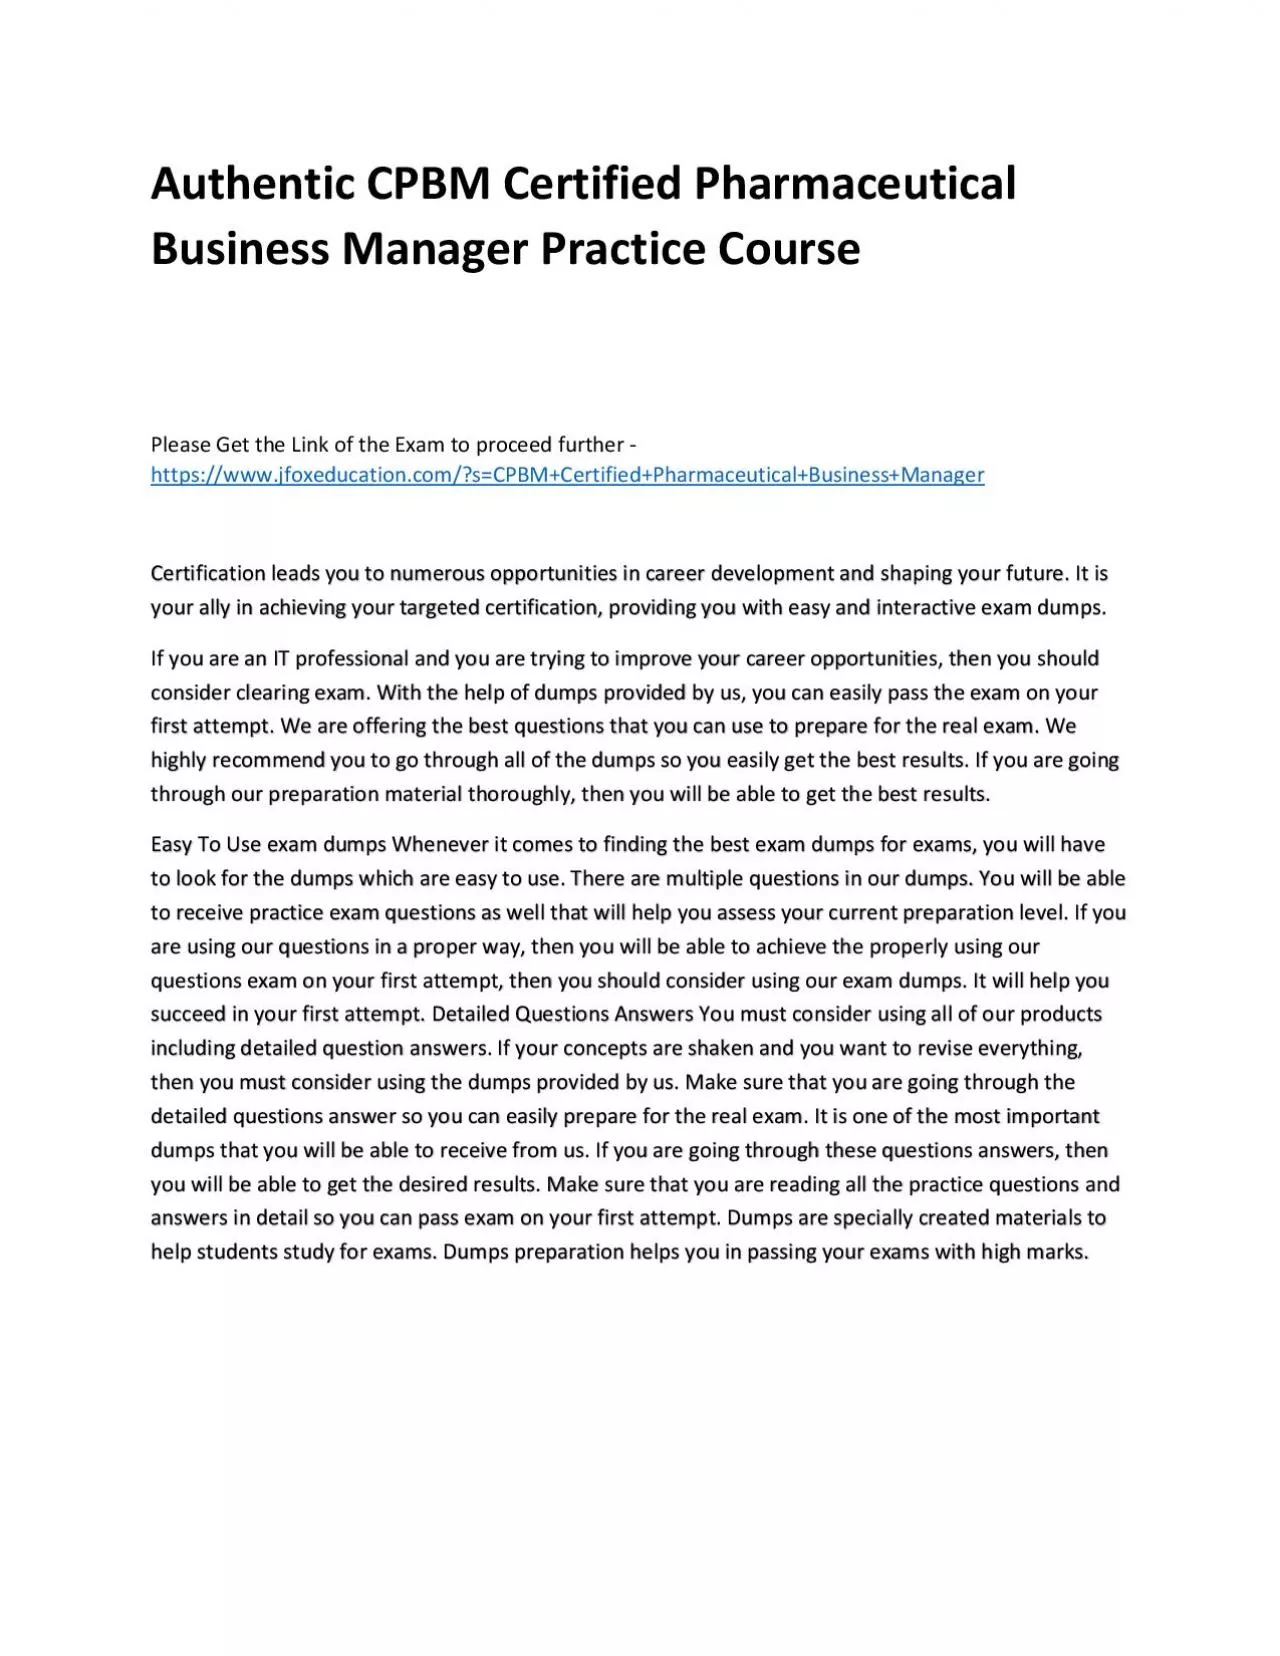 Authentic CPBM Certified Pharmaceutical Business Manager Practice Course